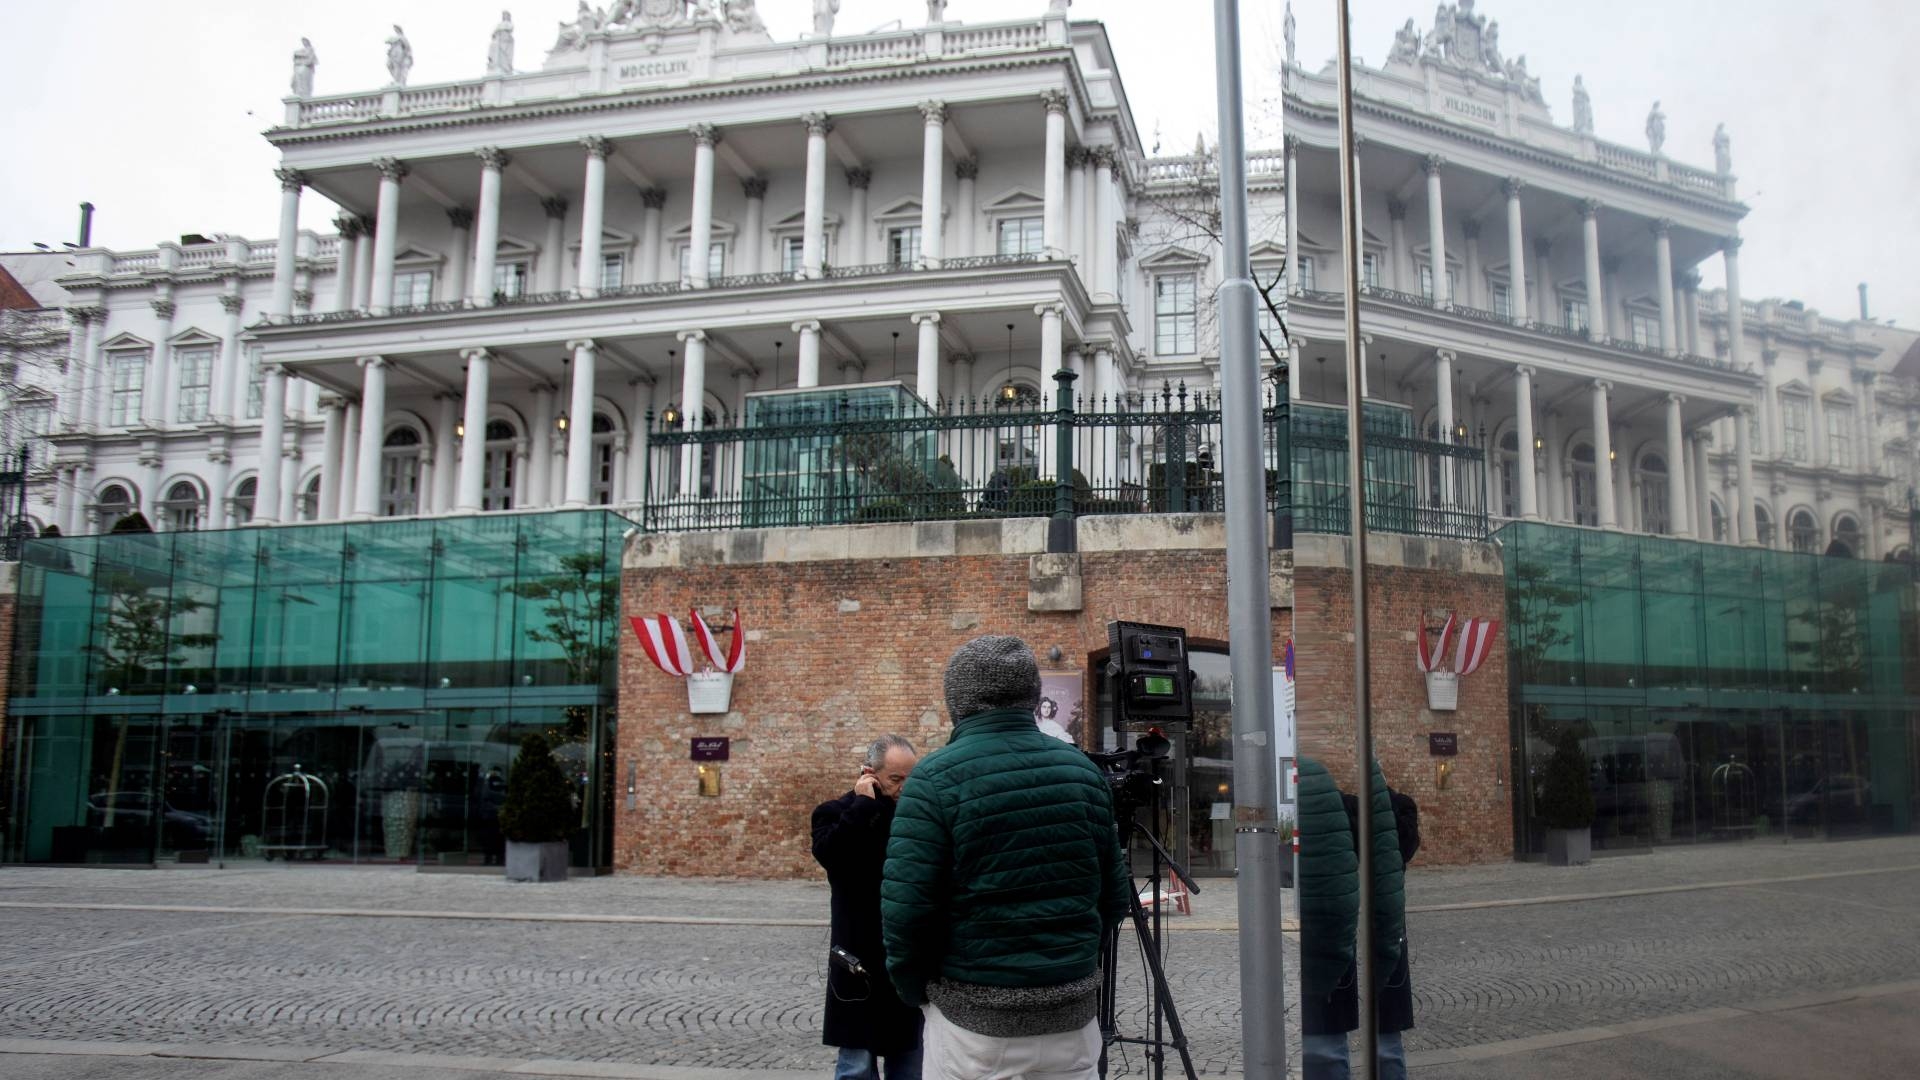 Journalists wait outside the Hotel Palais Coburg, where resumption of talks aimed at reviving the 2015 Iran nuclear deal are taking place in Vienna on 27 December 2021.